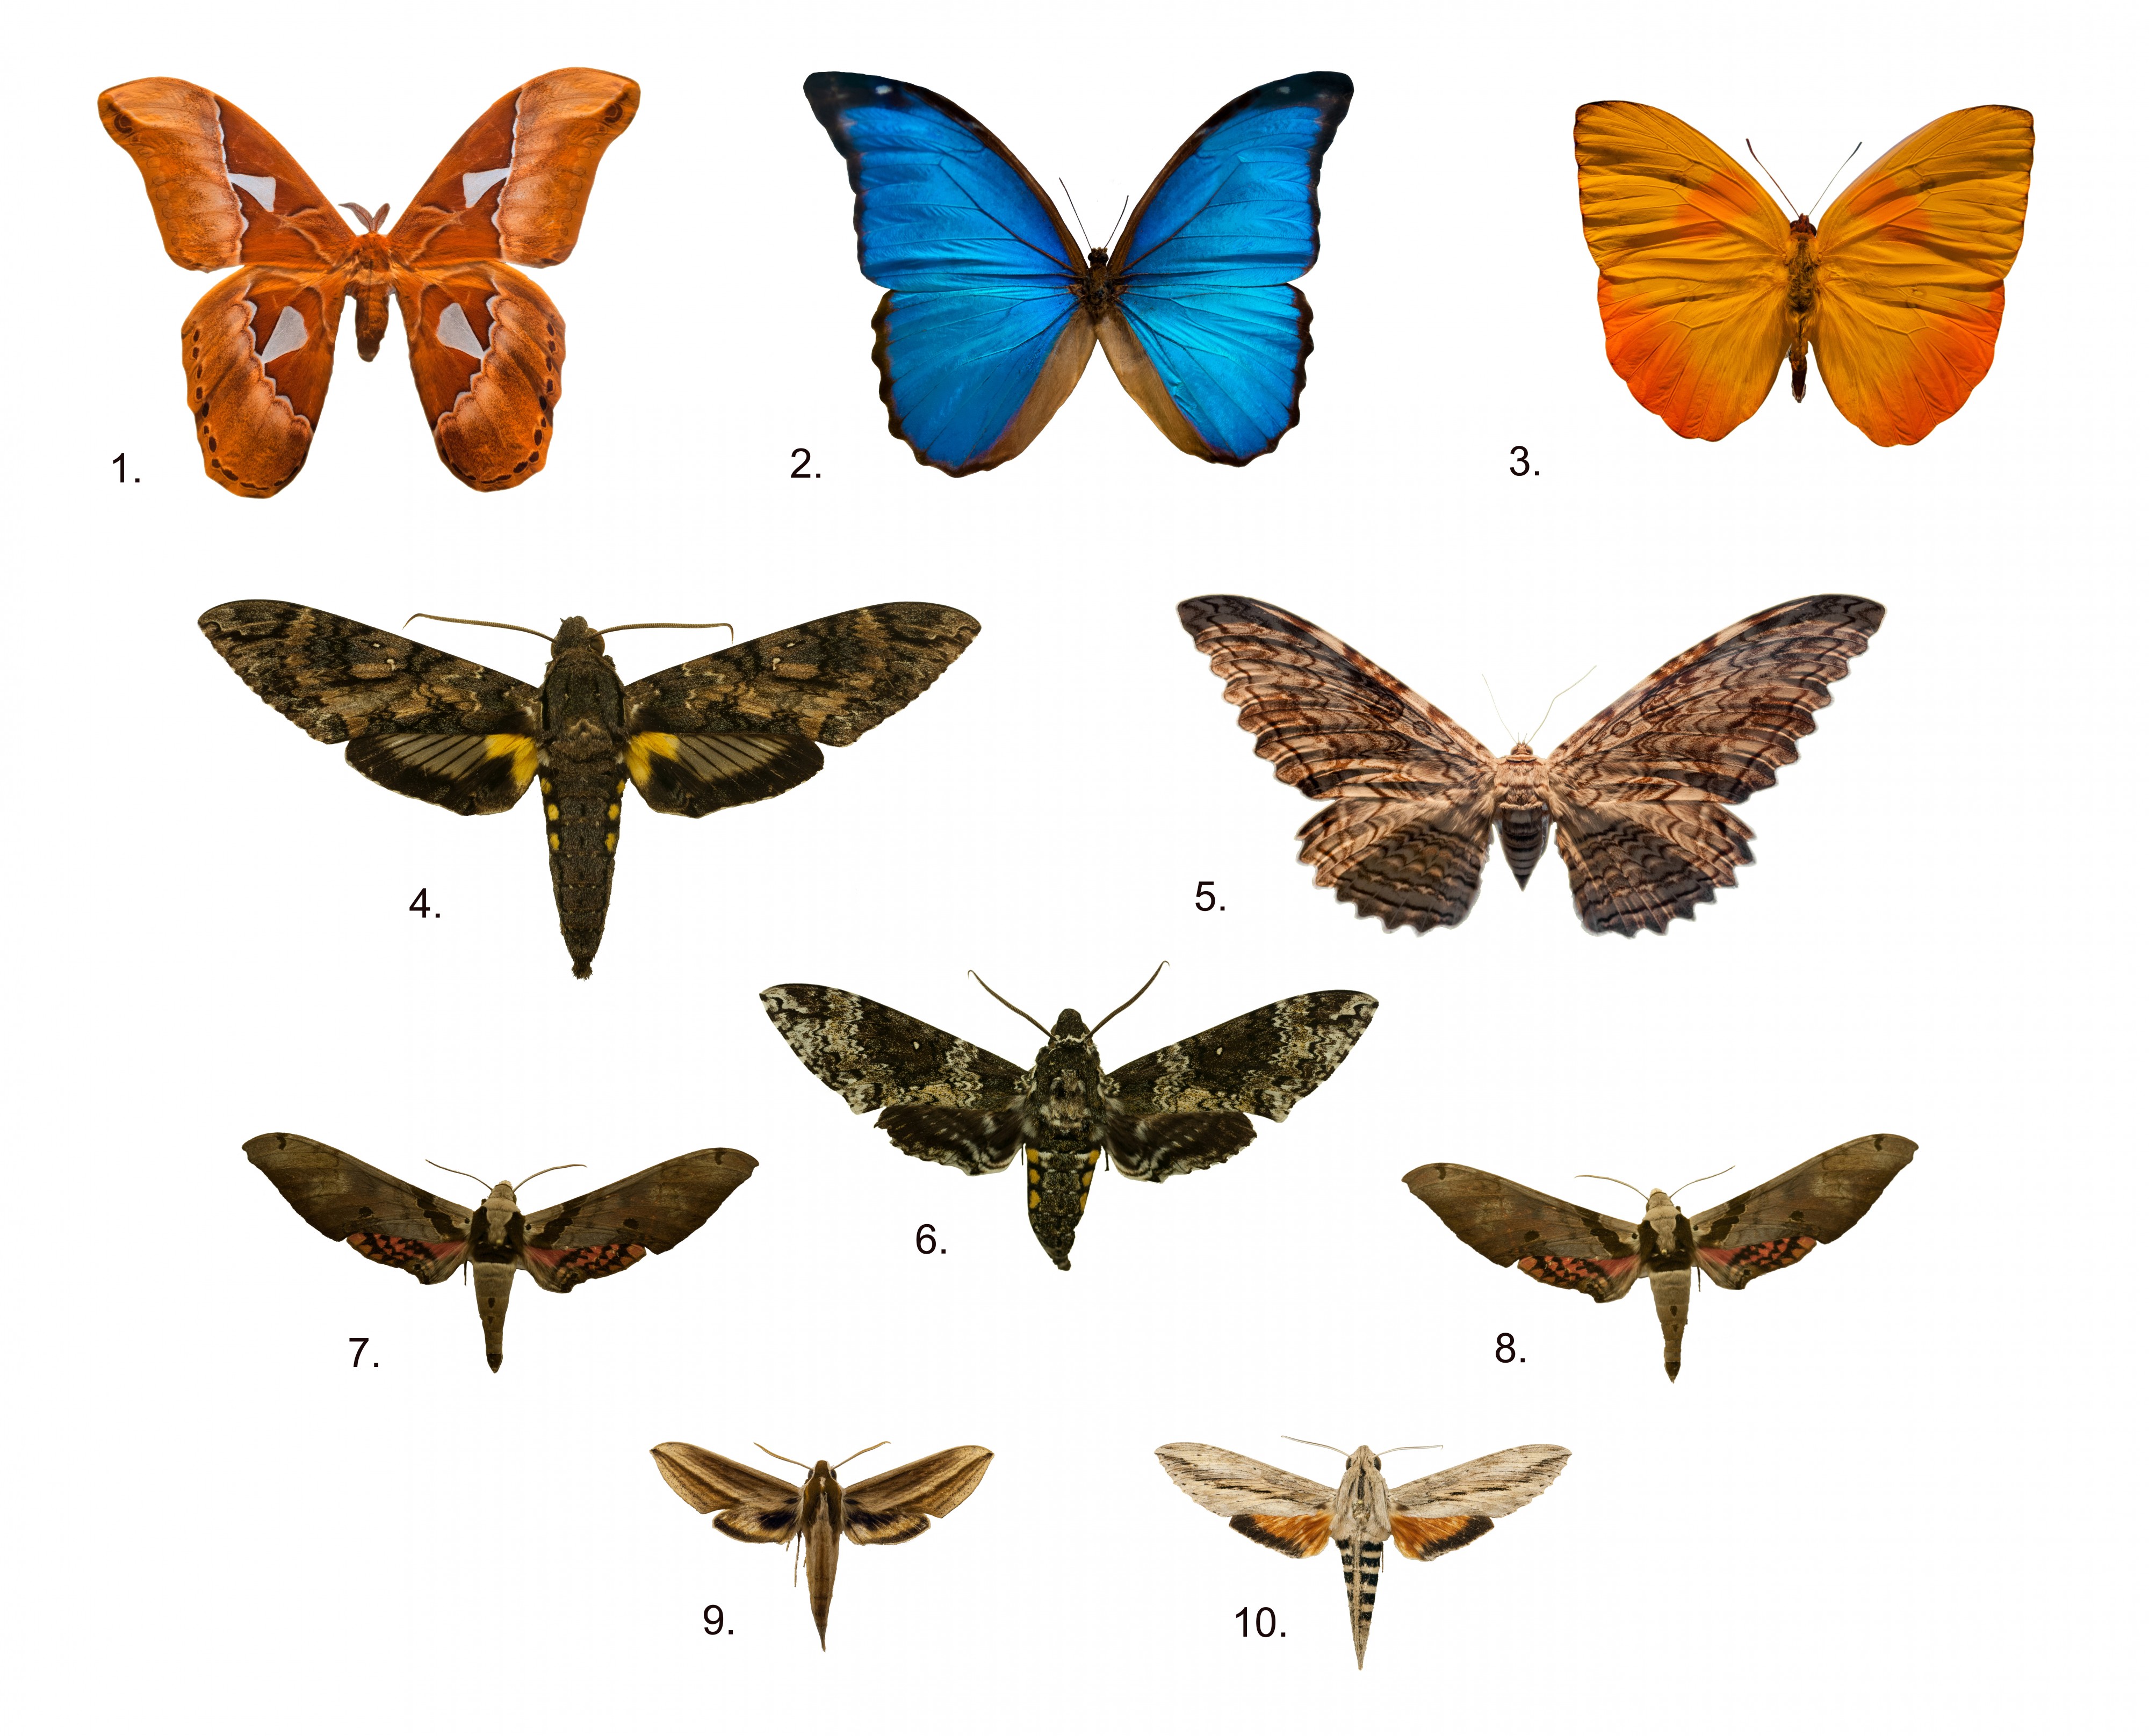 Brazilians butterfly collection, Zoology Museum, University of São Paulo